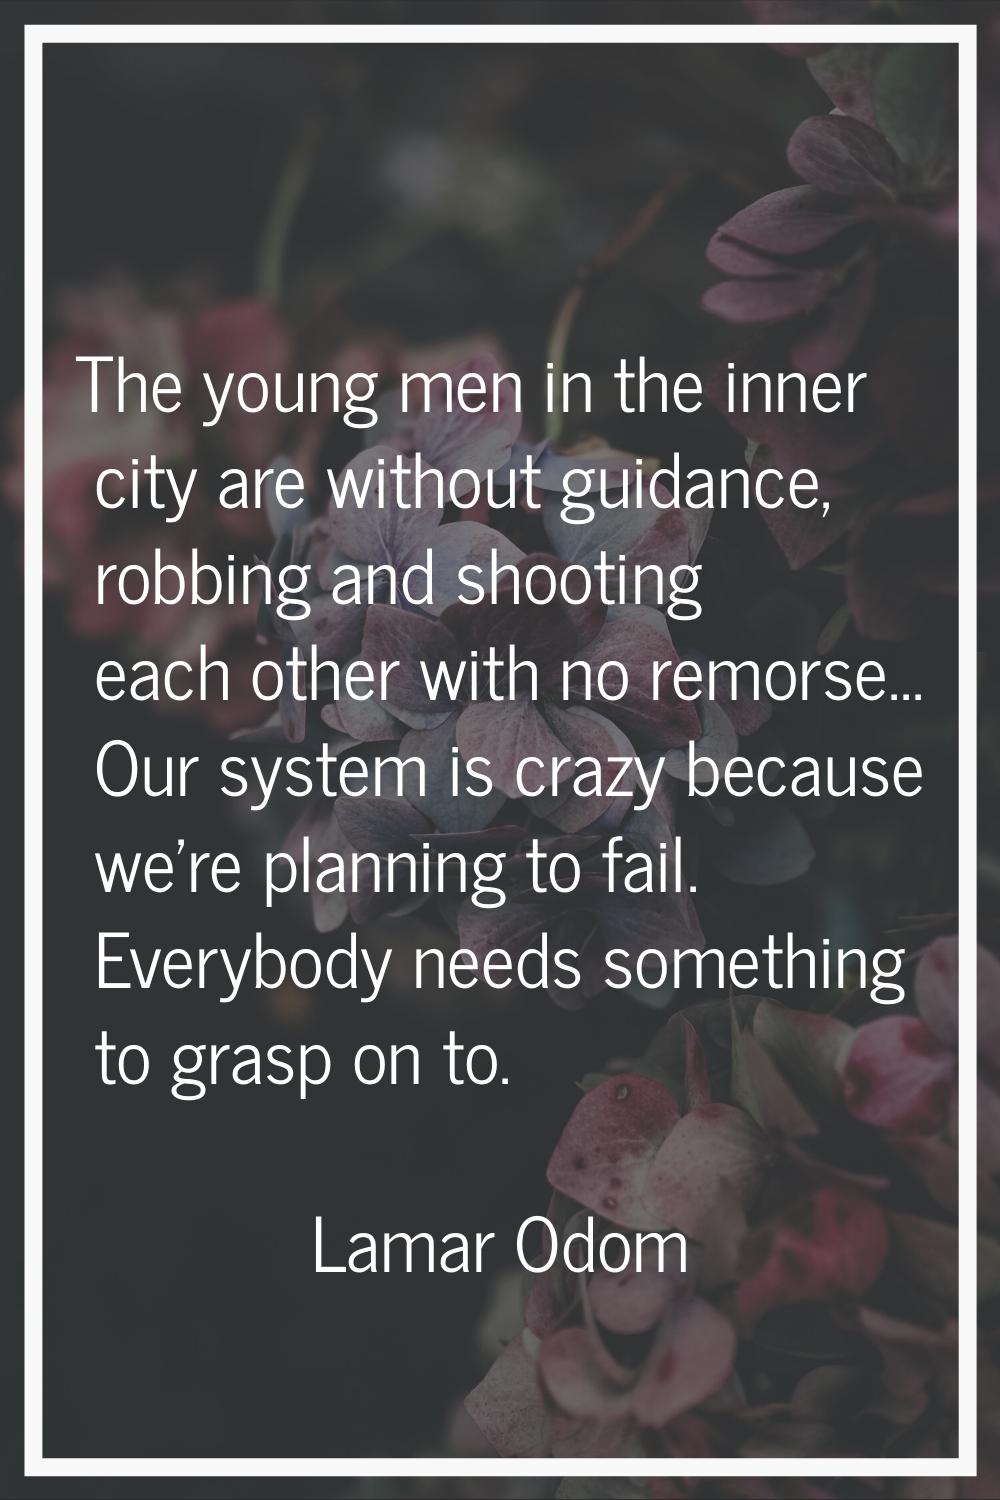 The young men in the inner city are without guidance, robbing and shooting each other with no remor